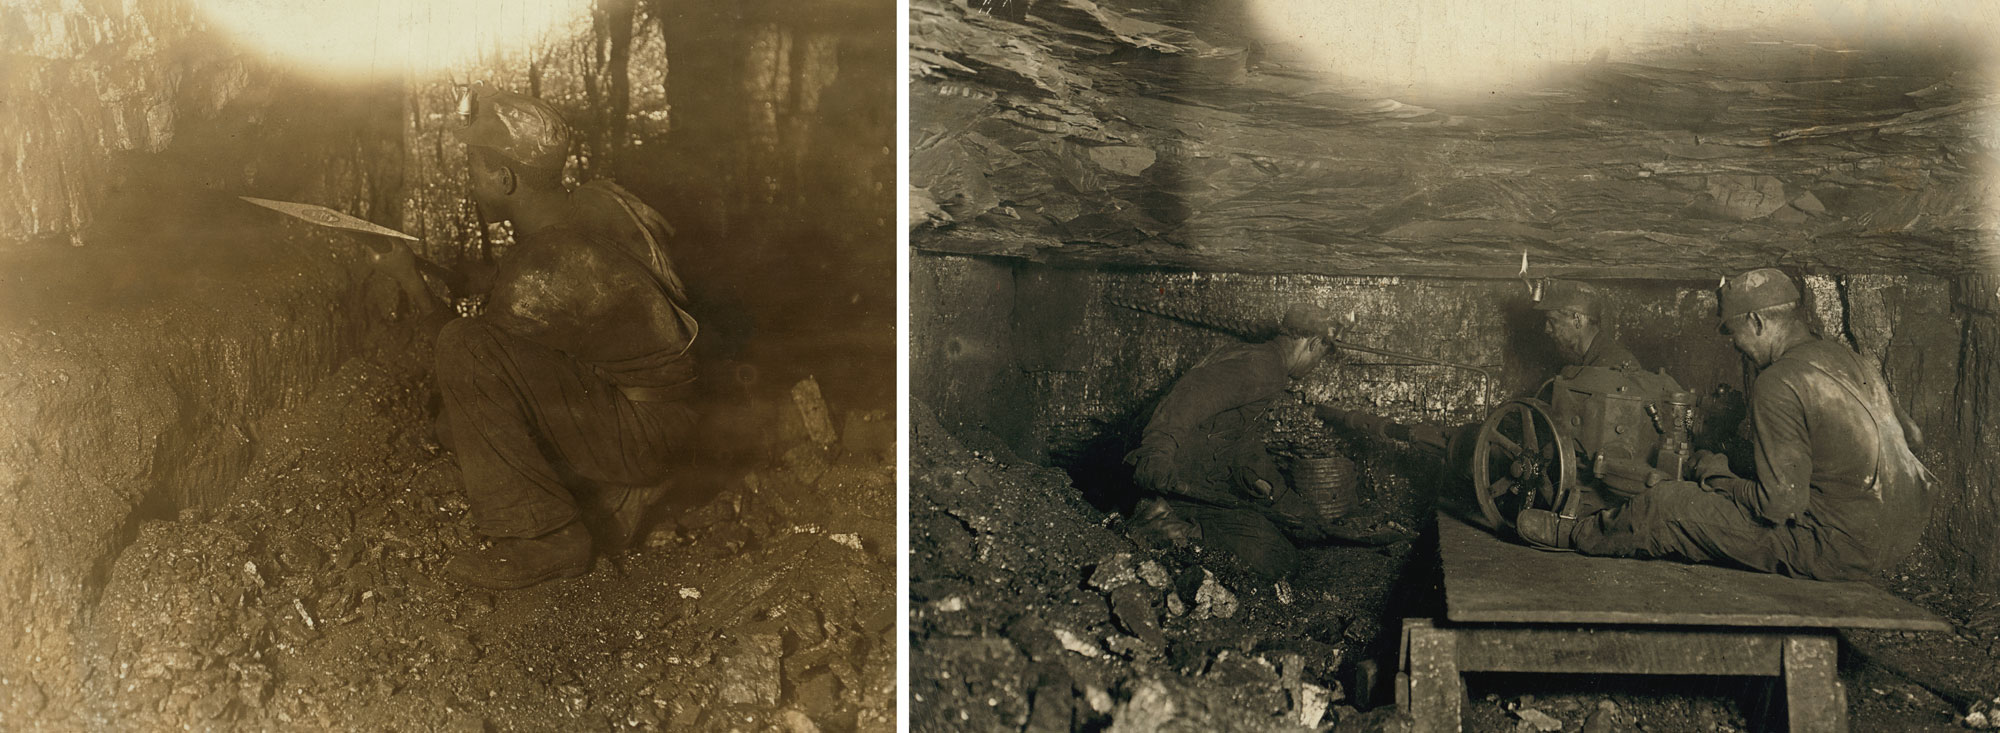 2-Panel image showing photos of coal miners in West Virginia, 1908. Panel 1: Miner using a pick to remove coal from a seam. Panel 2. Three miners digging coal in a shaft with a low ceiling.